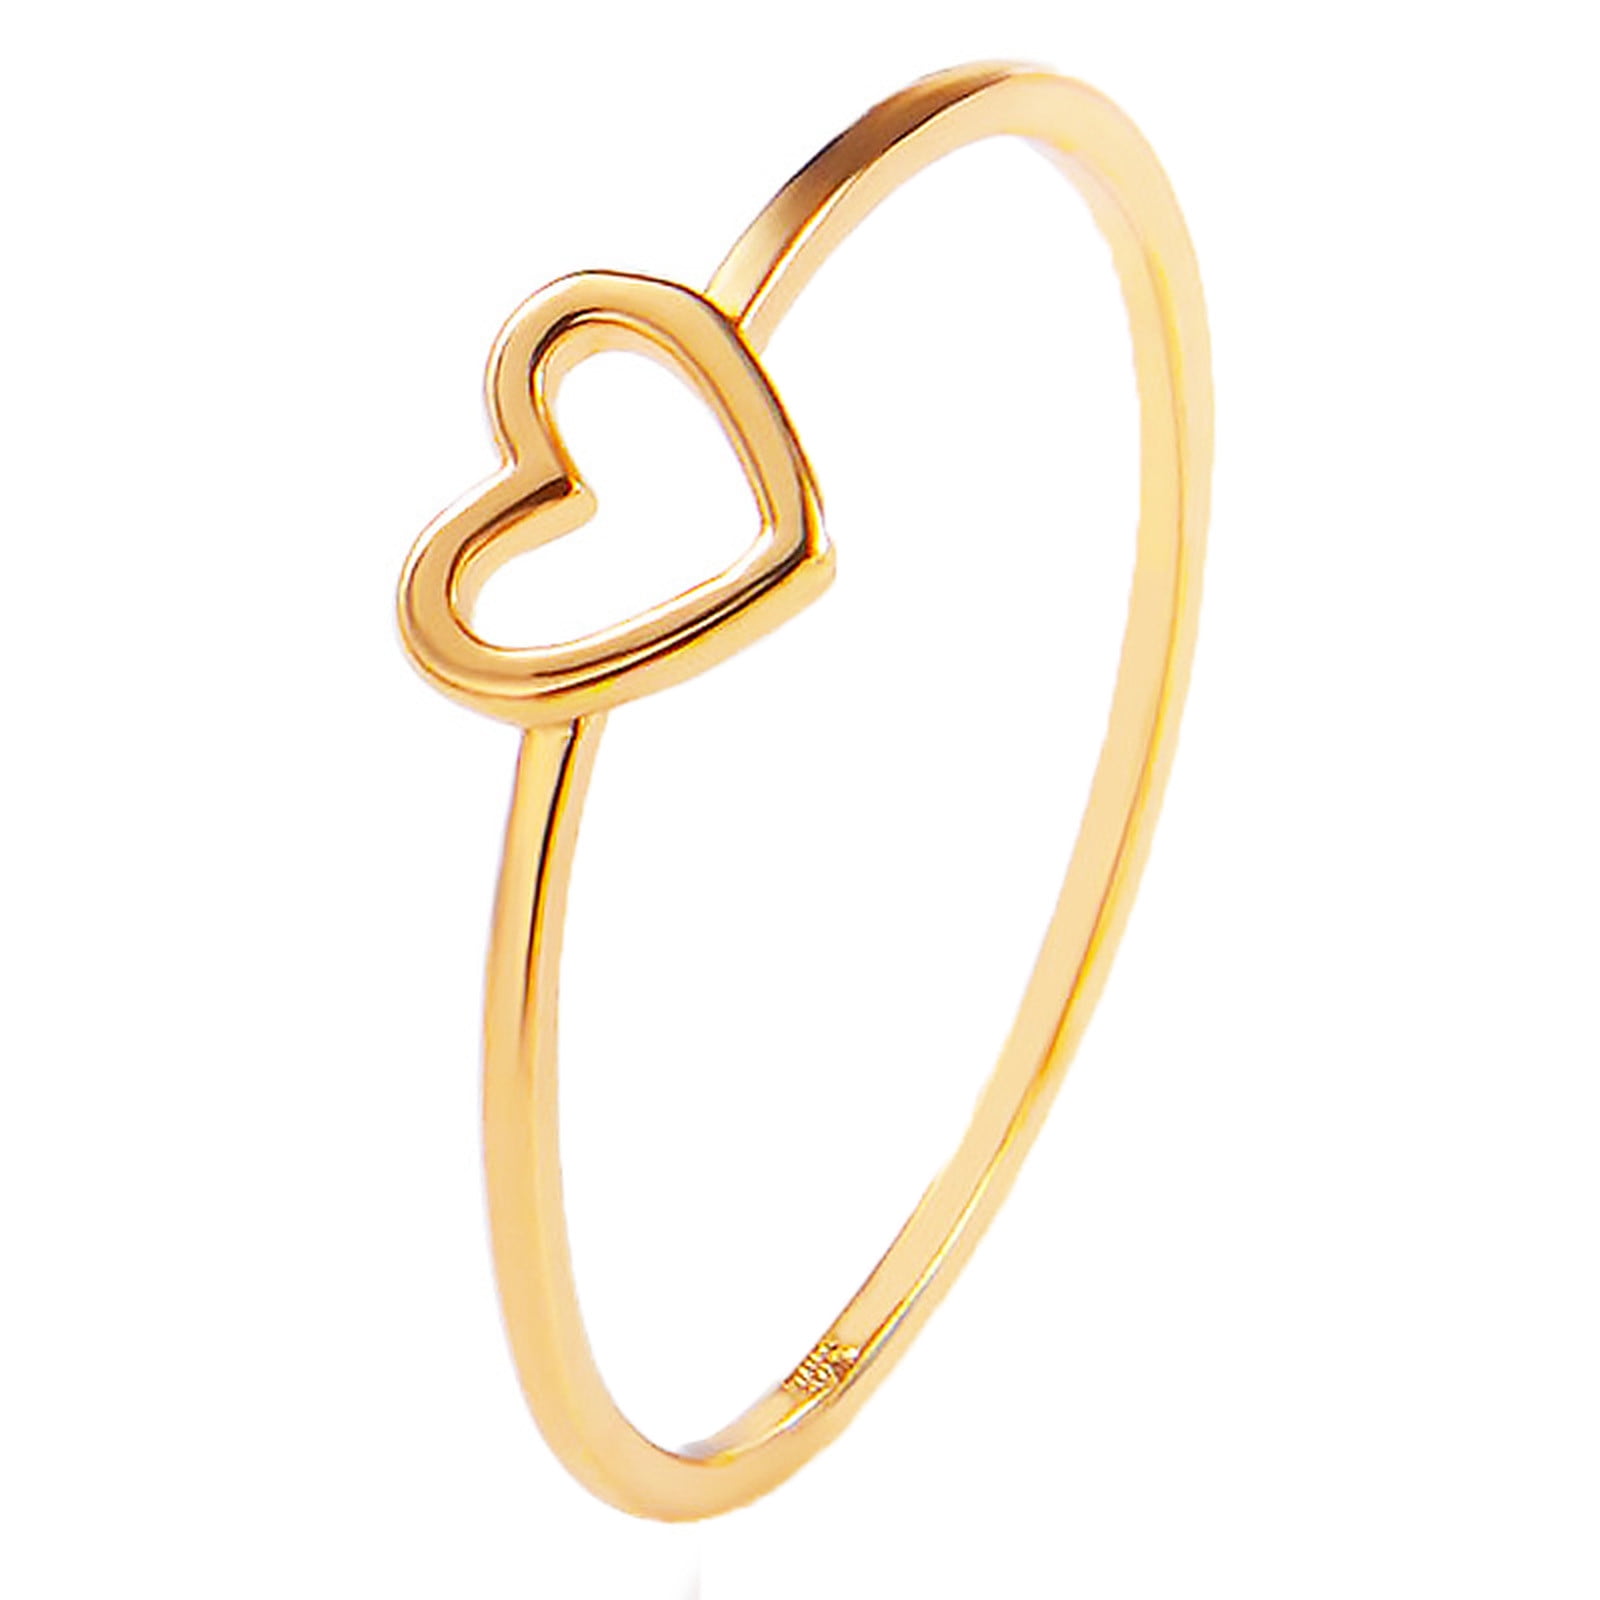 UDS CREATION UDS CREATION WOMEN NEW FANCY RING / BEST RING FOR WOMEN Alloy  Brass, Gold Plated Ring Price in India - Buy UDS CREATION UDS CREATION WOMEN  NEW FANCY RING /